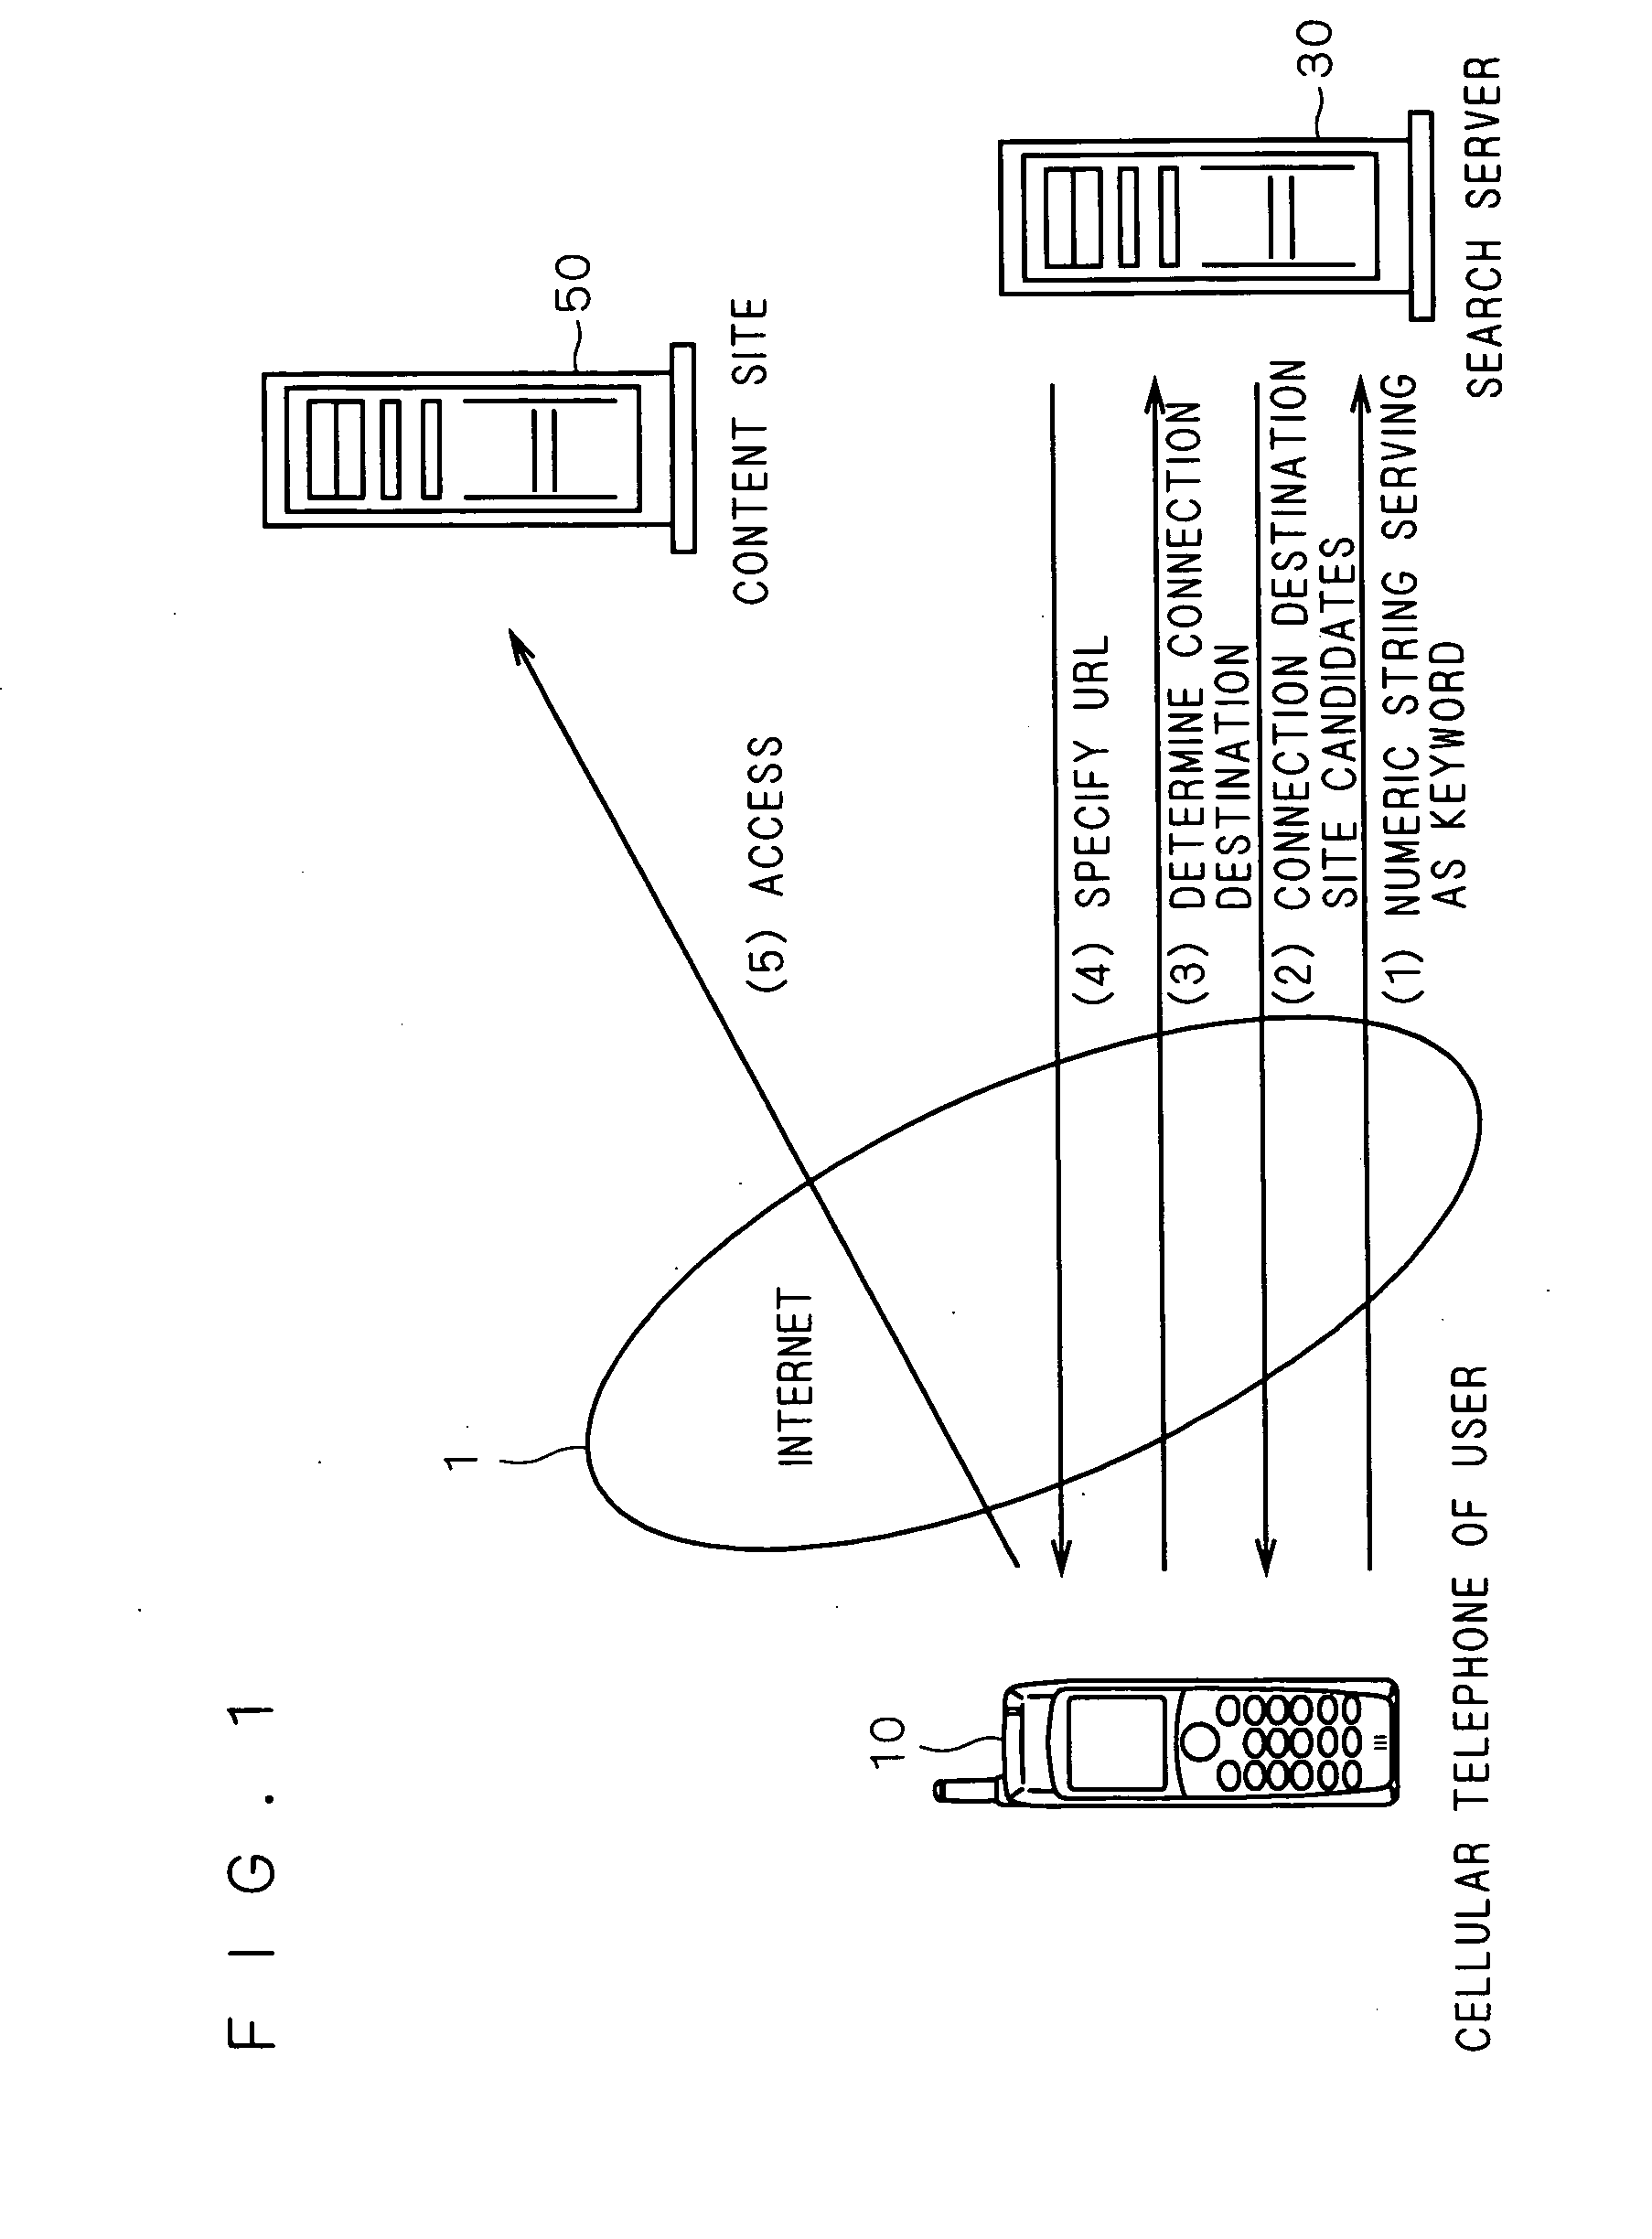 Mobile telephone and mobile telephone network connection system